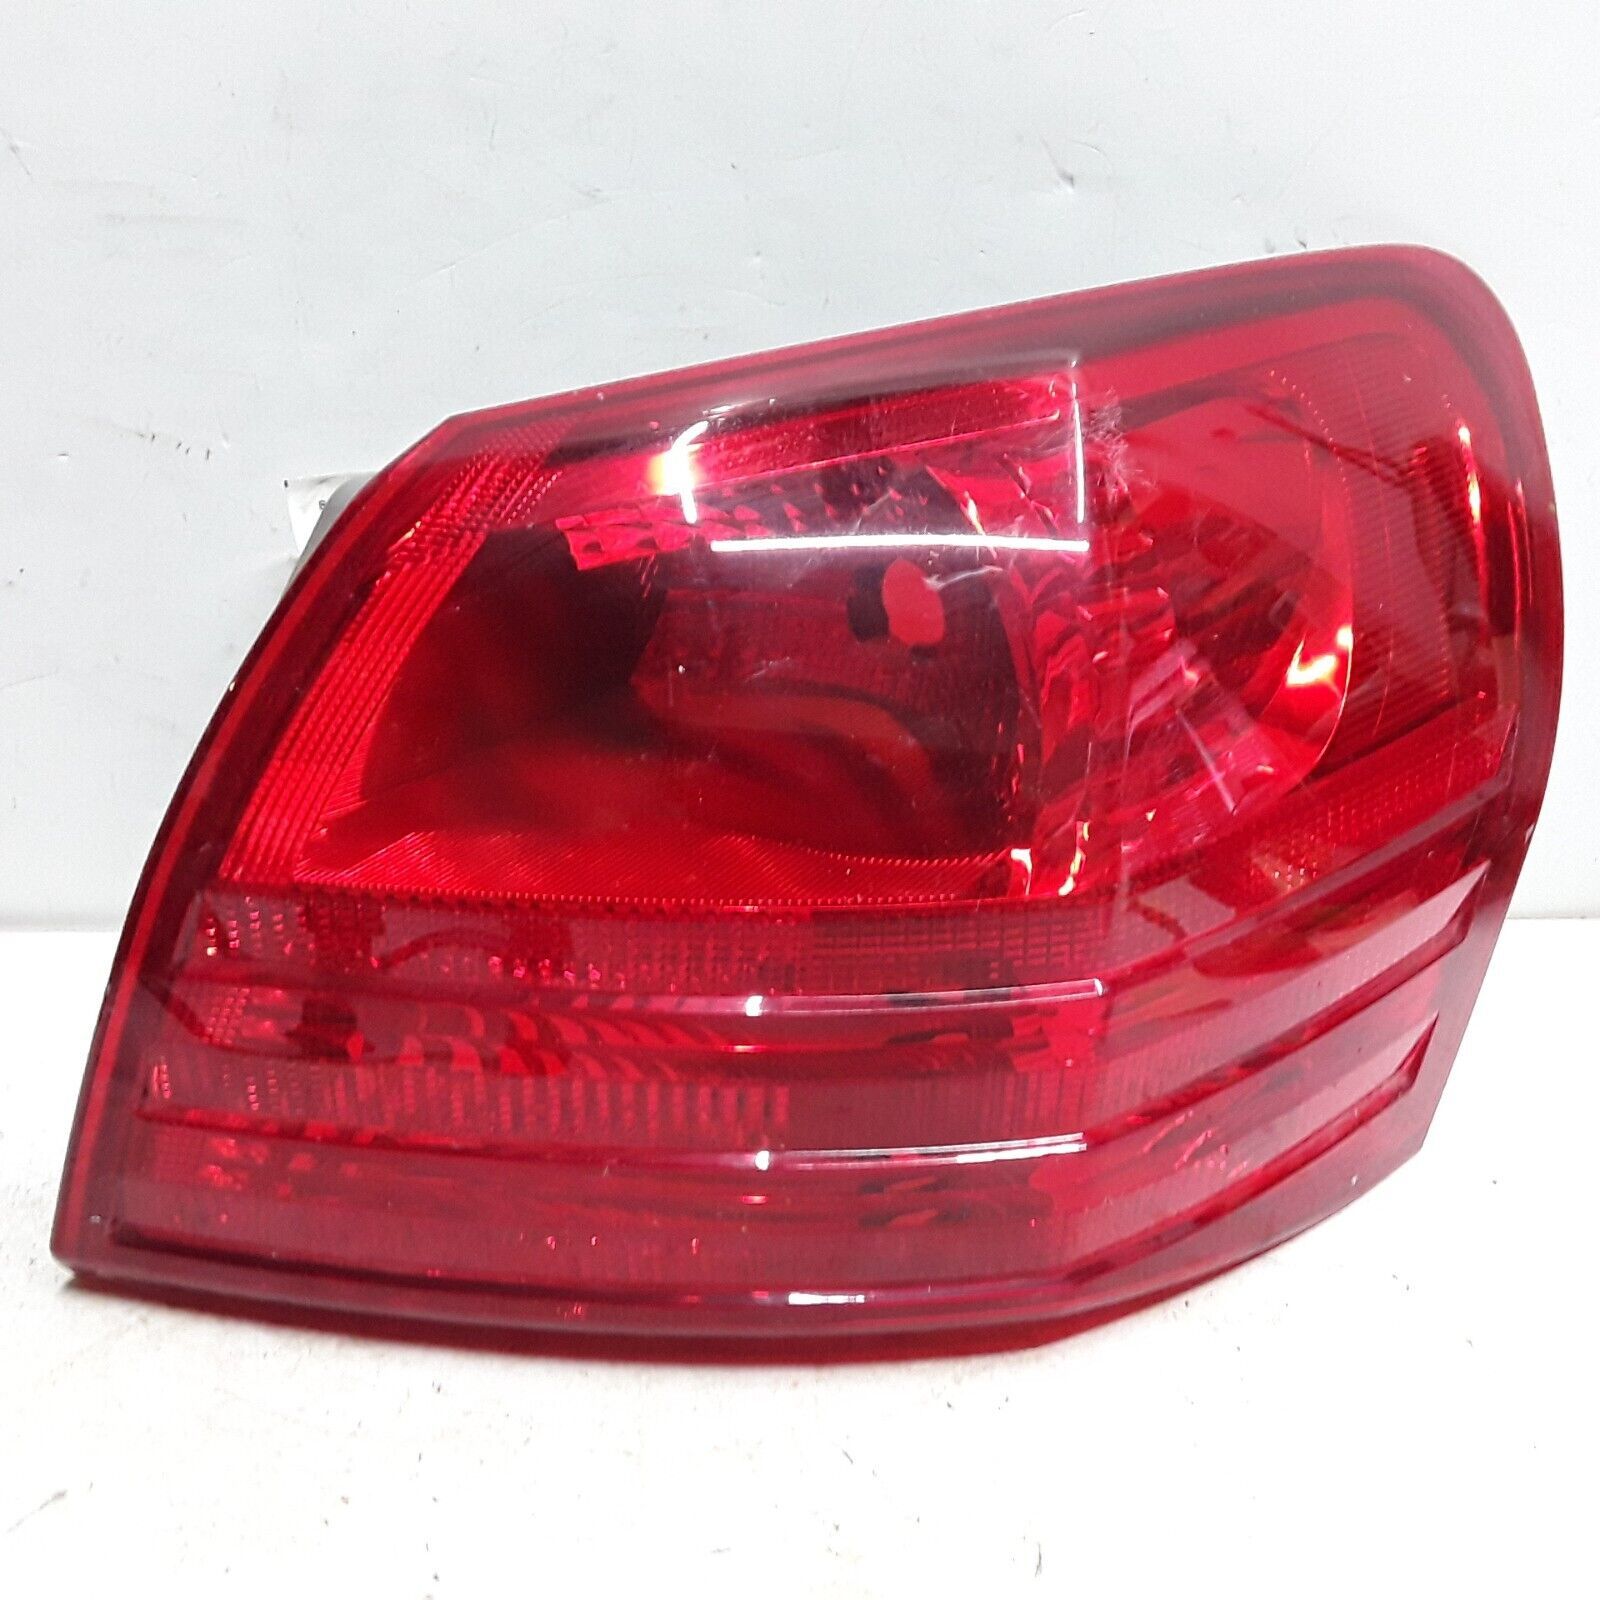 Primary image for 08 09 10 11 12 13 14 15 Nissan Rogue right passenger outer tail light assembly